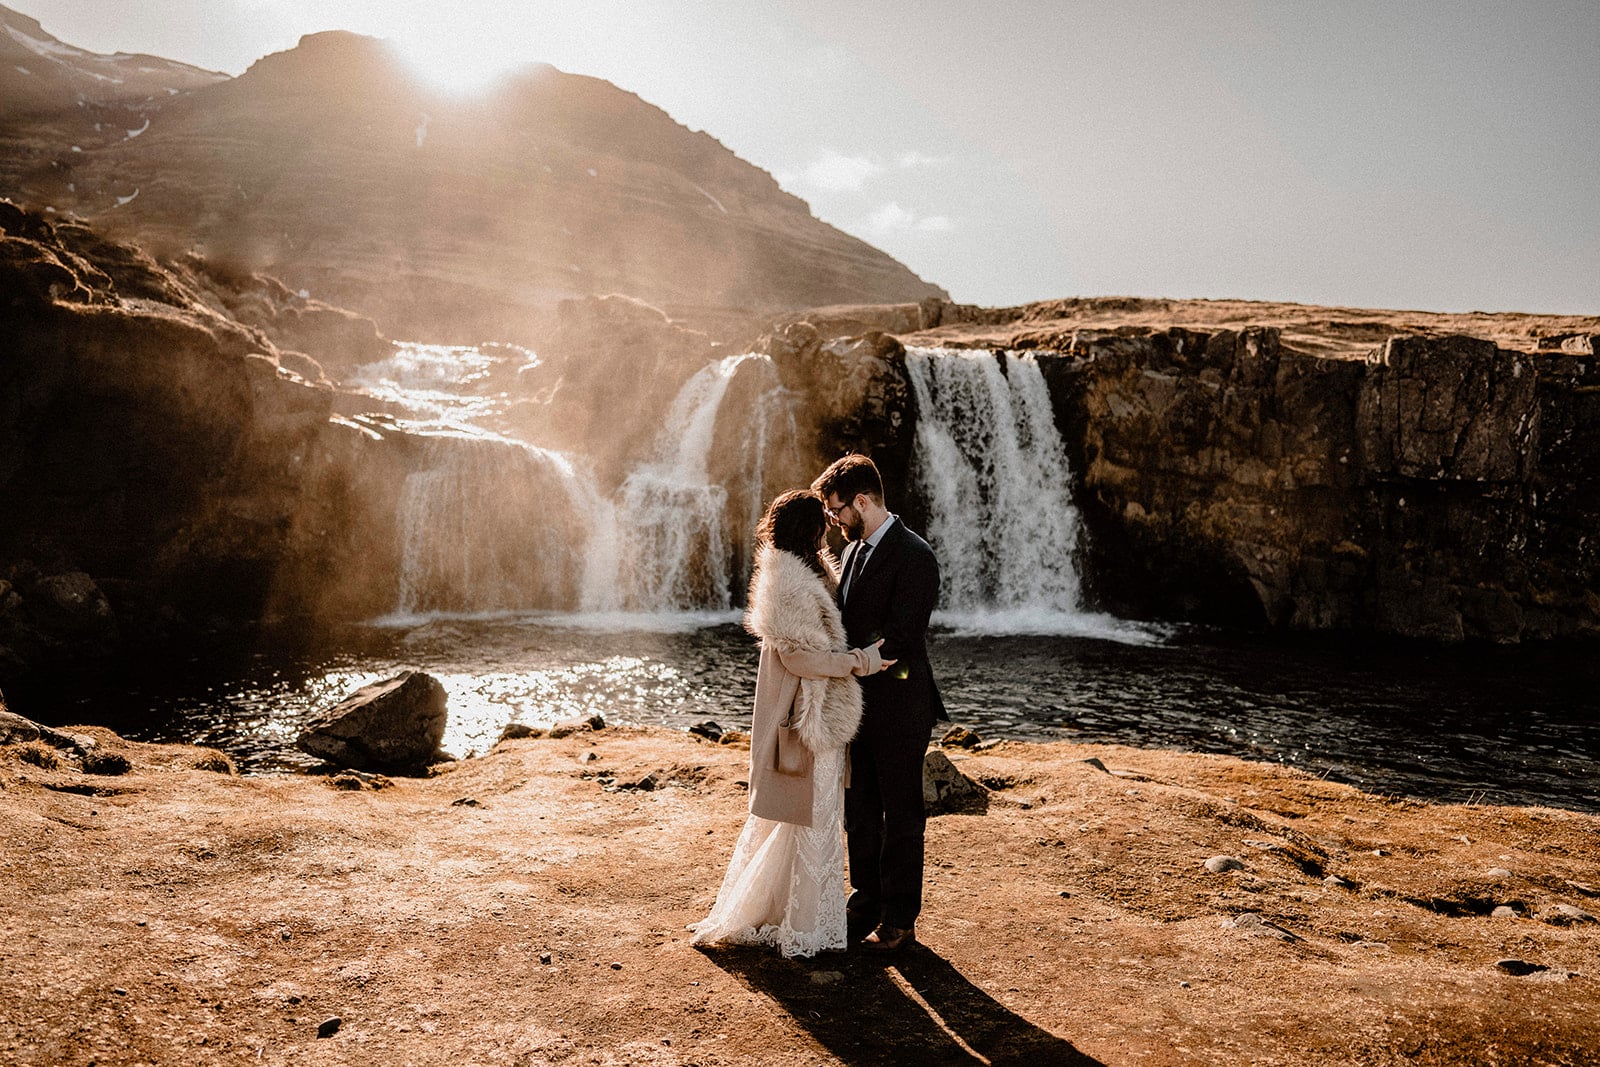 Elopement Magic Unveiled: Bride and Groom's Western Iceland Adventure